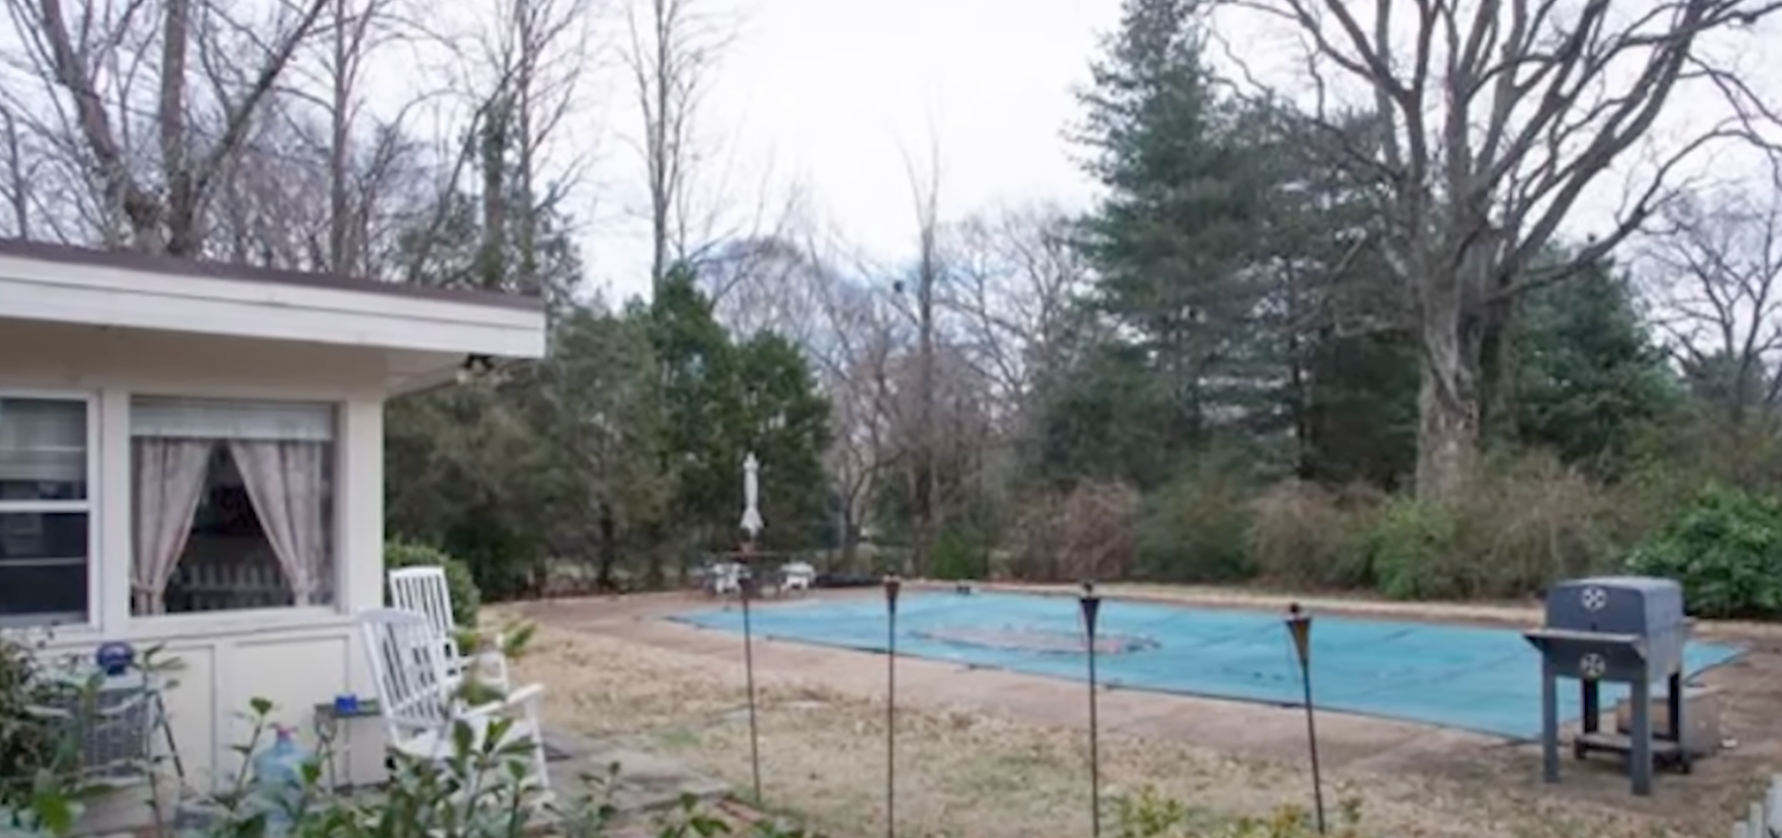 Reese Witherspoon and Jim Toth's family home swimming pool in Nashville | Source: YouTube/@FamousEntertainment